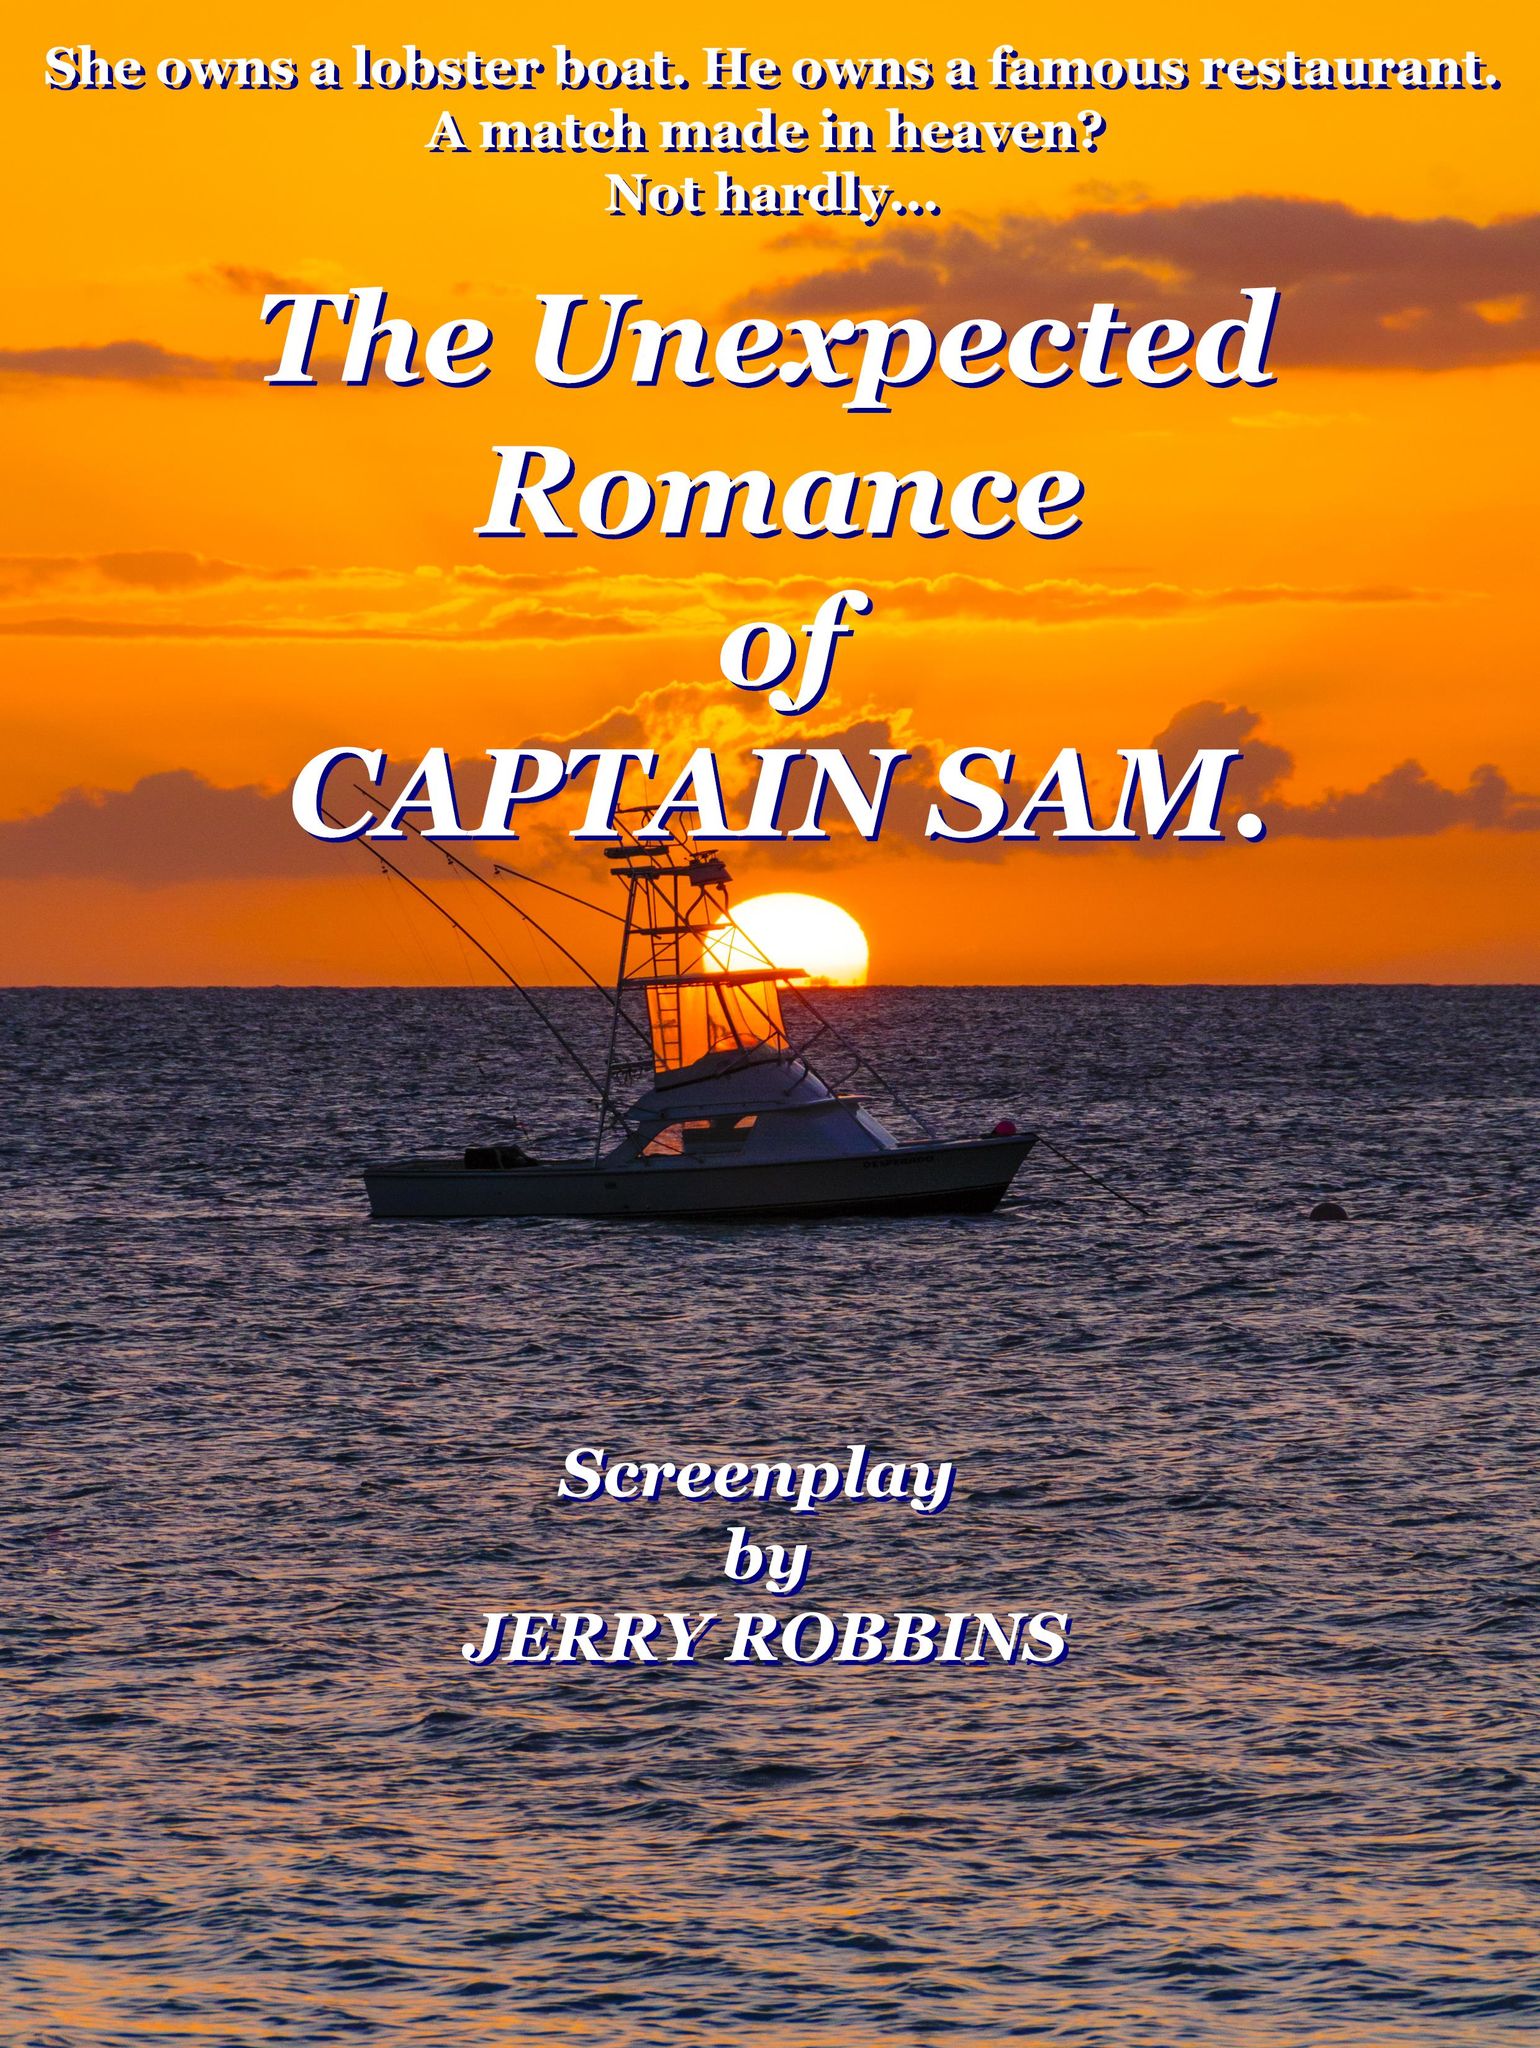 THE UNEXPECTED ROMANCE OF CAPTAIN SAM